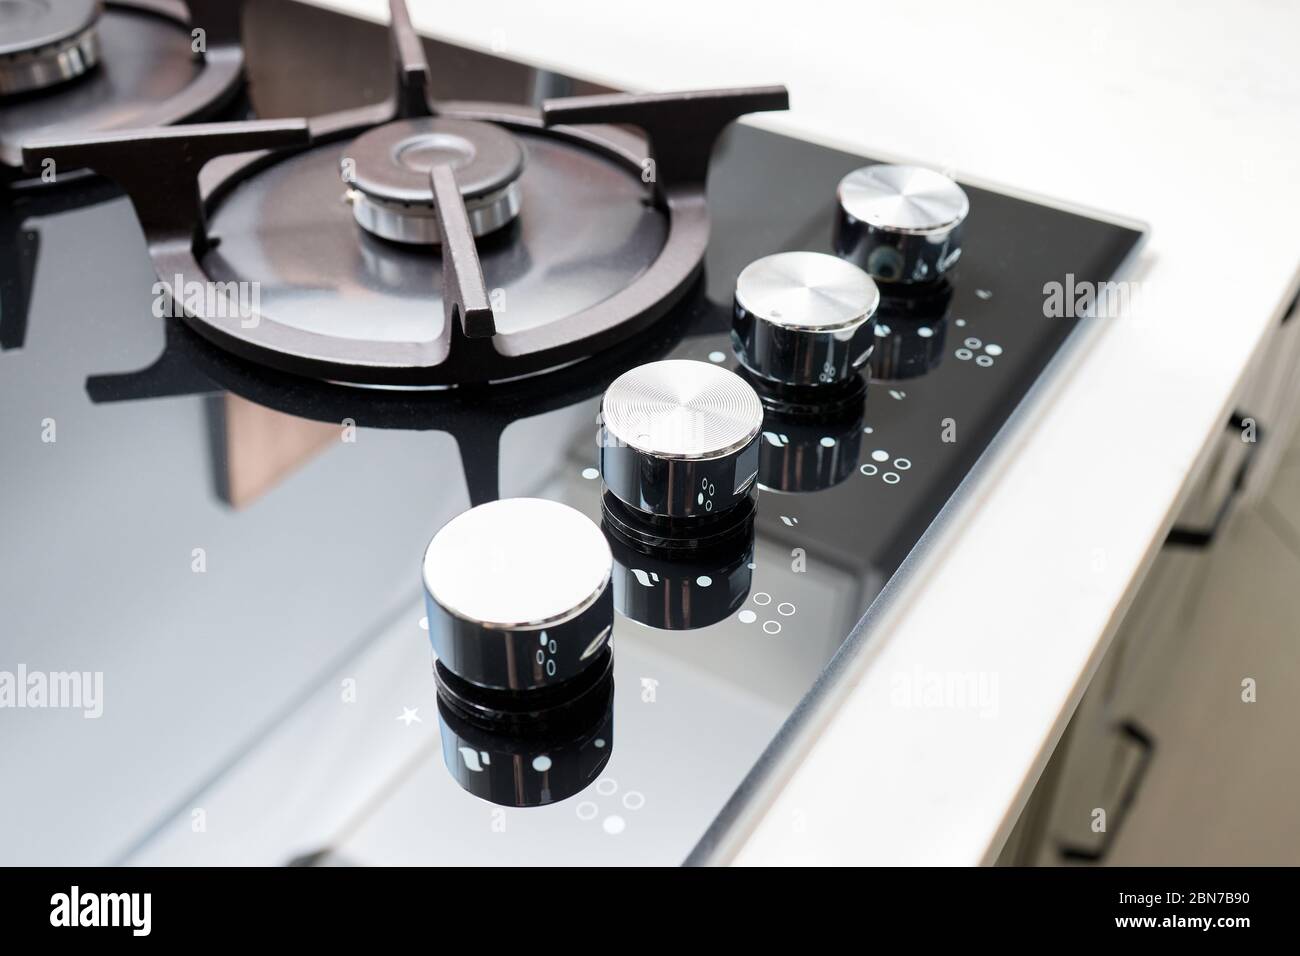 Hob cooker oven grill, stainless steel control knobs selective focus over out of focus kitchenware background. Stock Photo